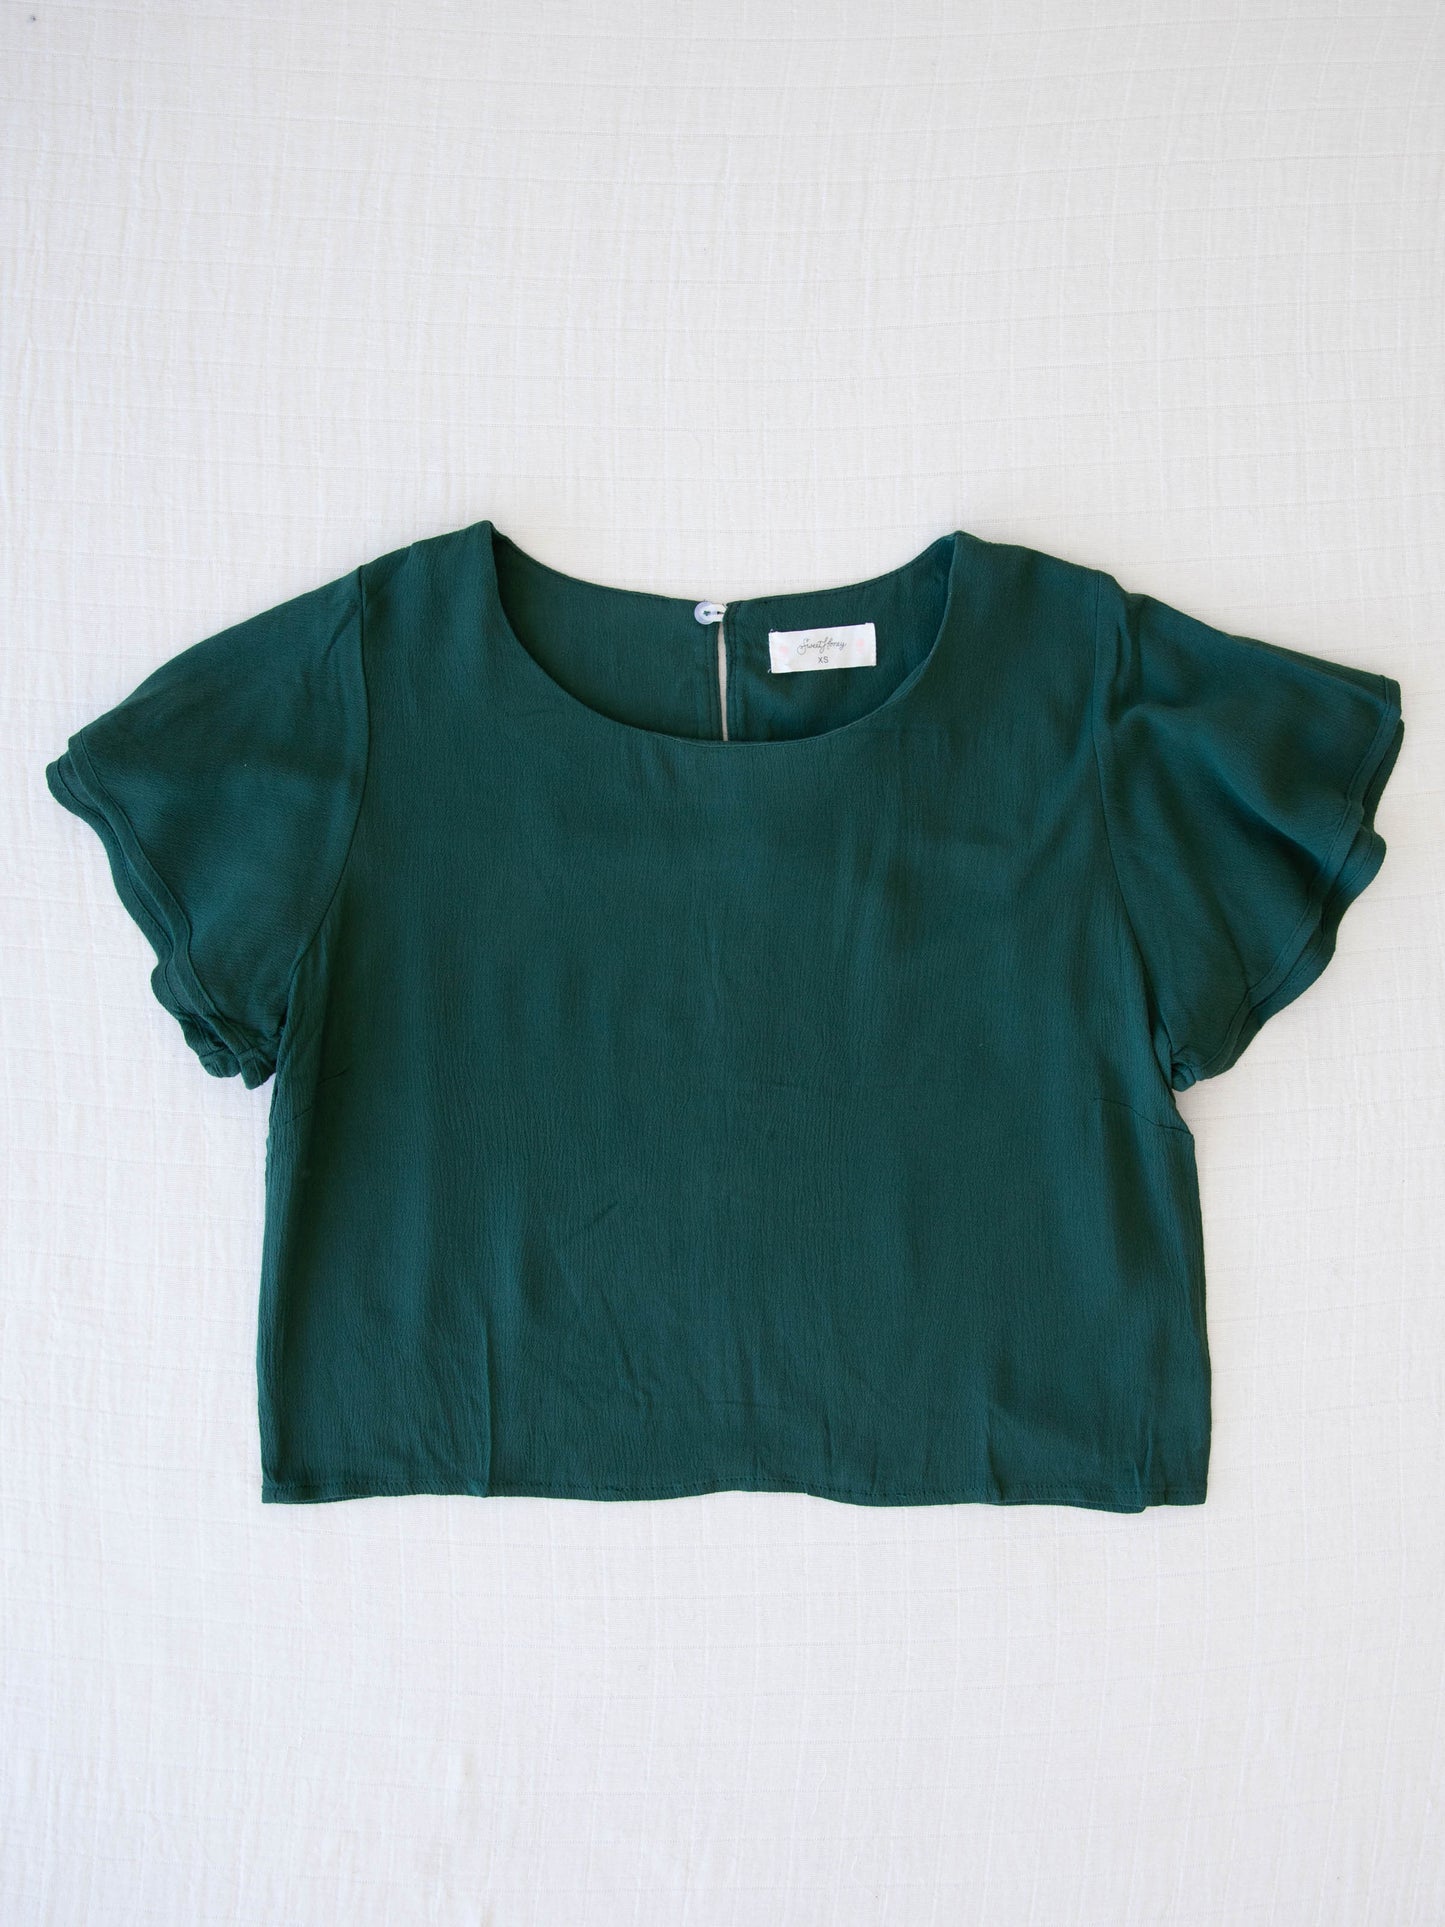 Women's Flutter Top - Green. This top has double ruffled fluttery short sleeves and comes in a dark green color. 